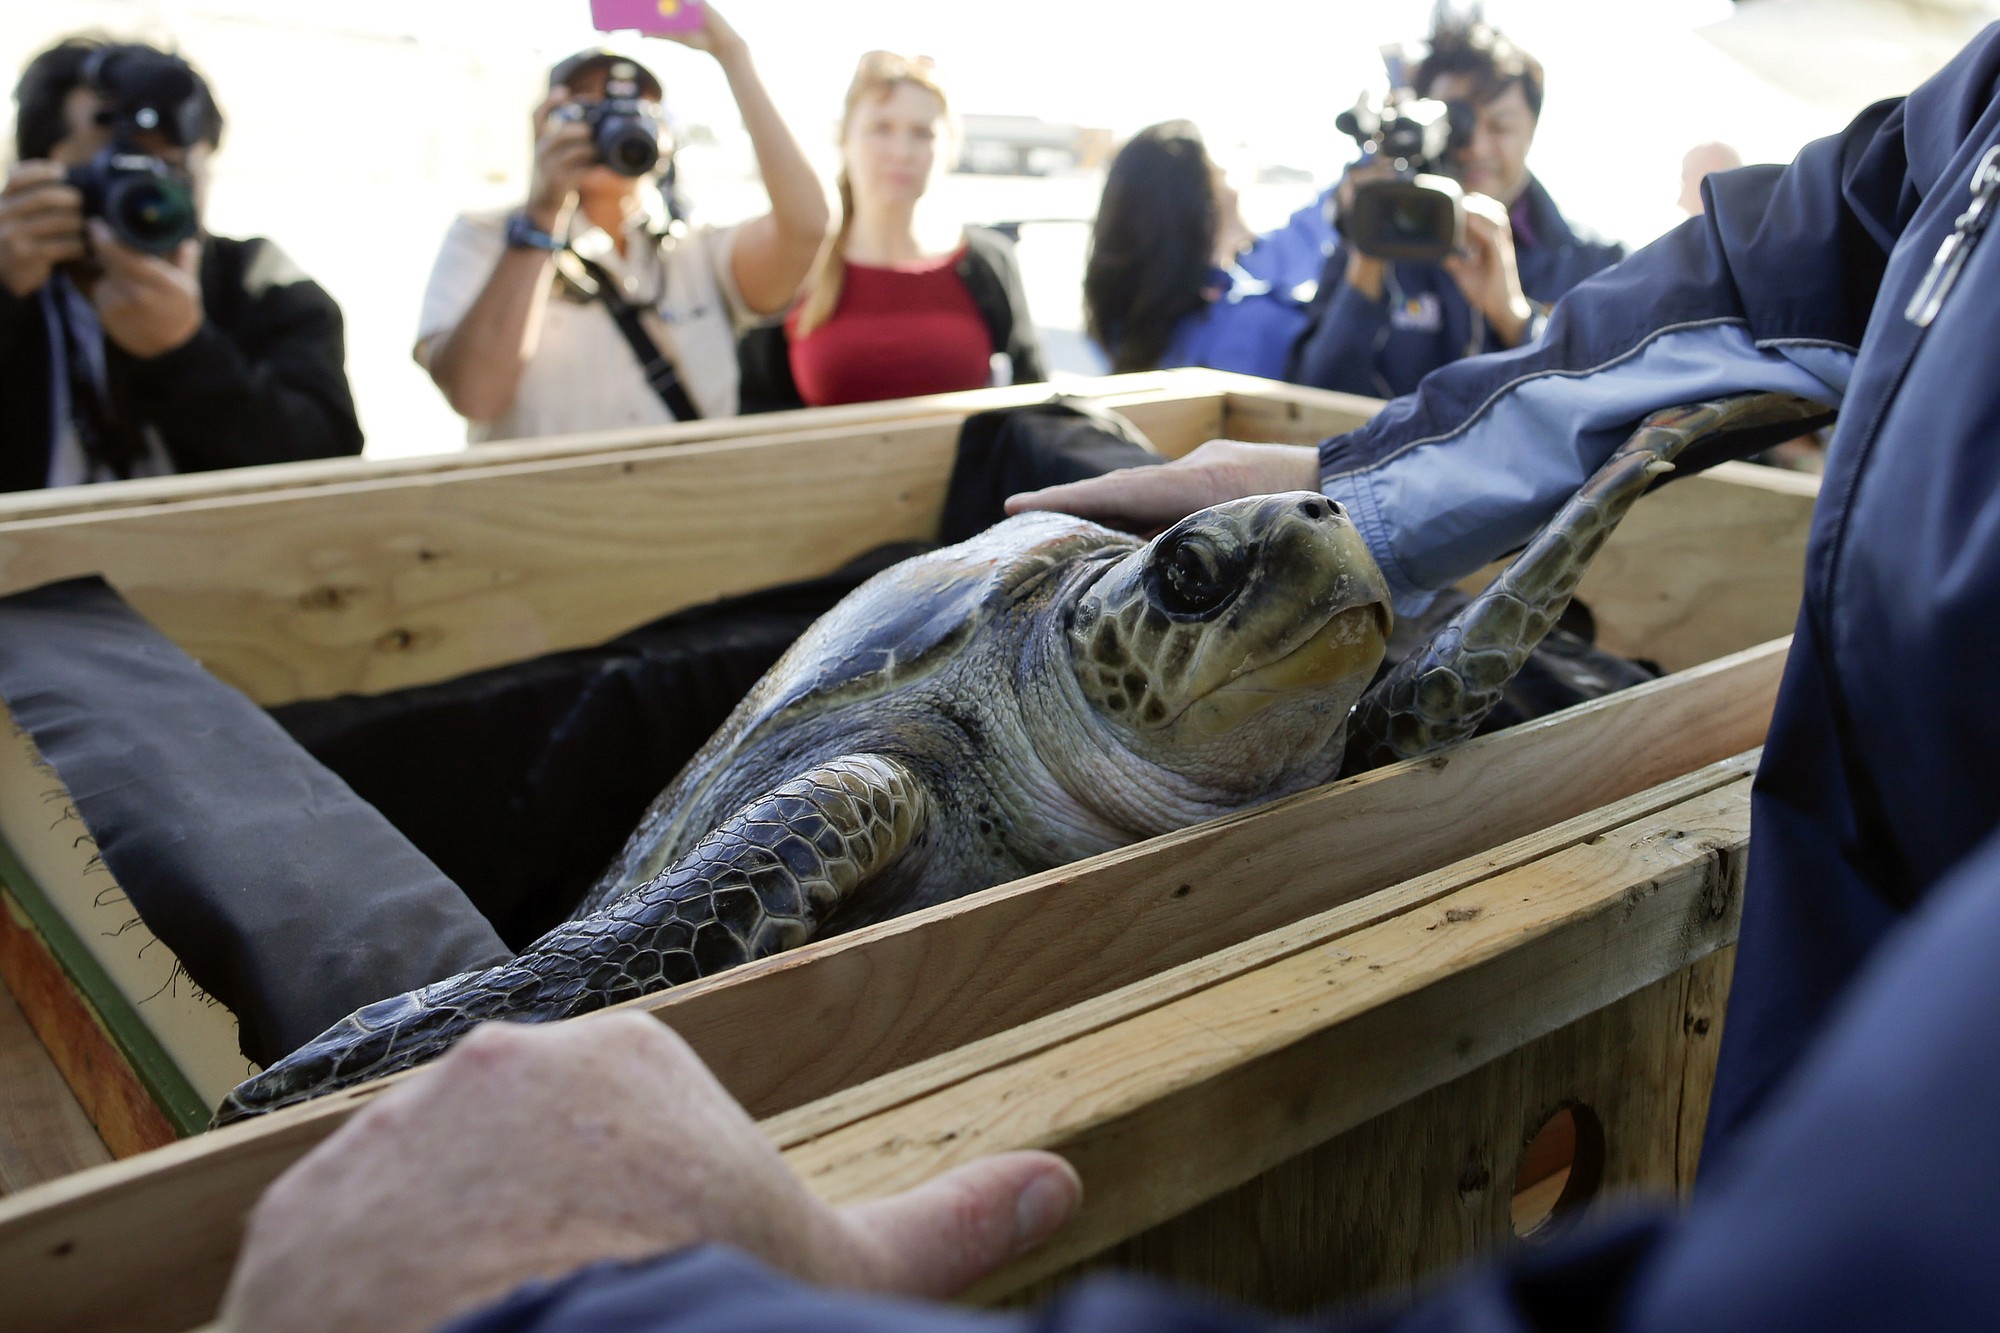 Photos by Gregory Bull/Associated Press
Solstice, an endangered olive ridley sea turtle, arrives Tuesday in Coronado, Calif. Solstice will undergo rehabilitation at Sea World in San Diego.